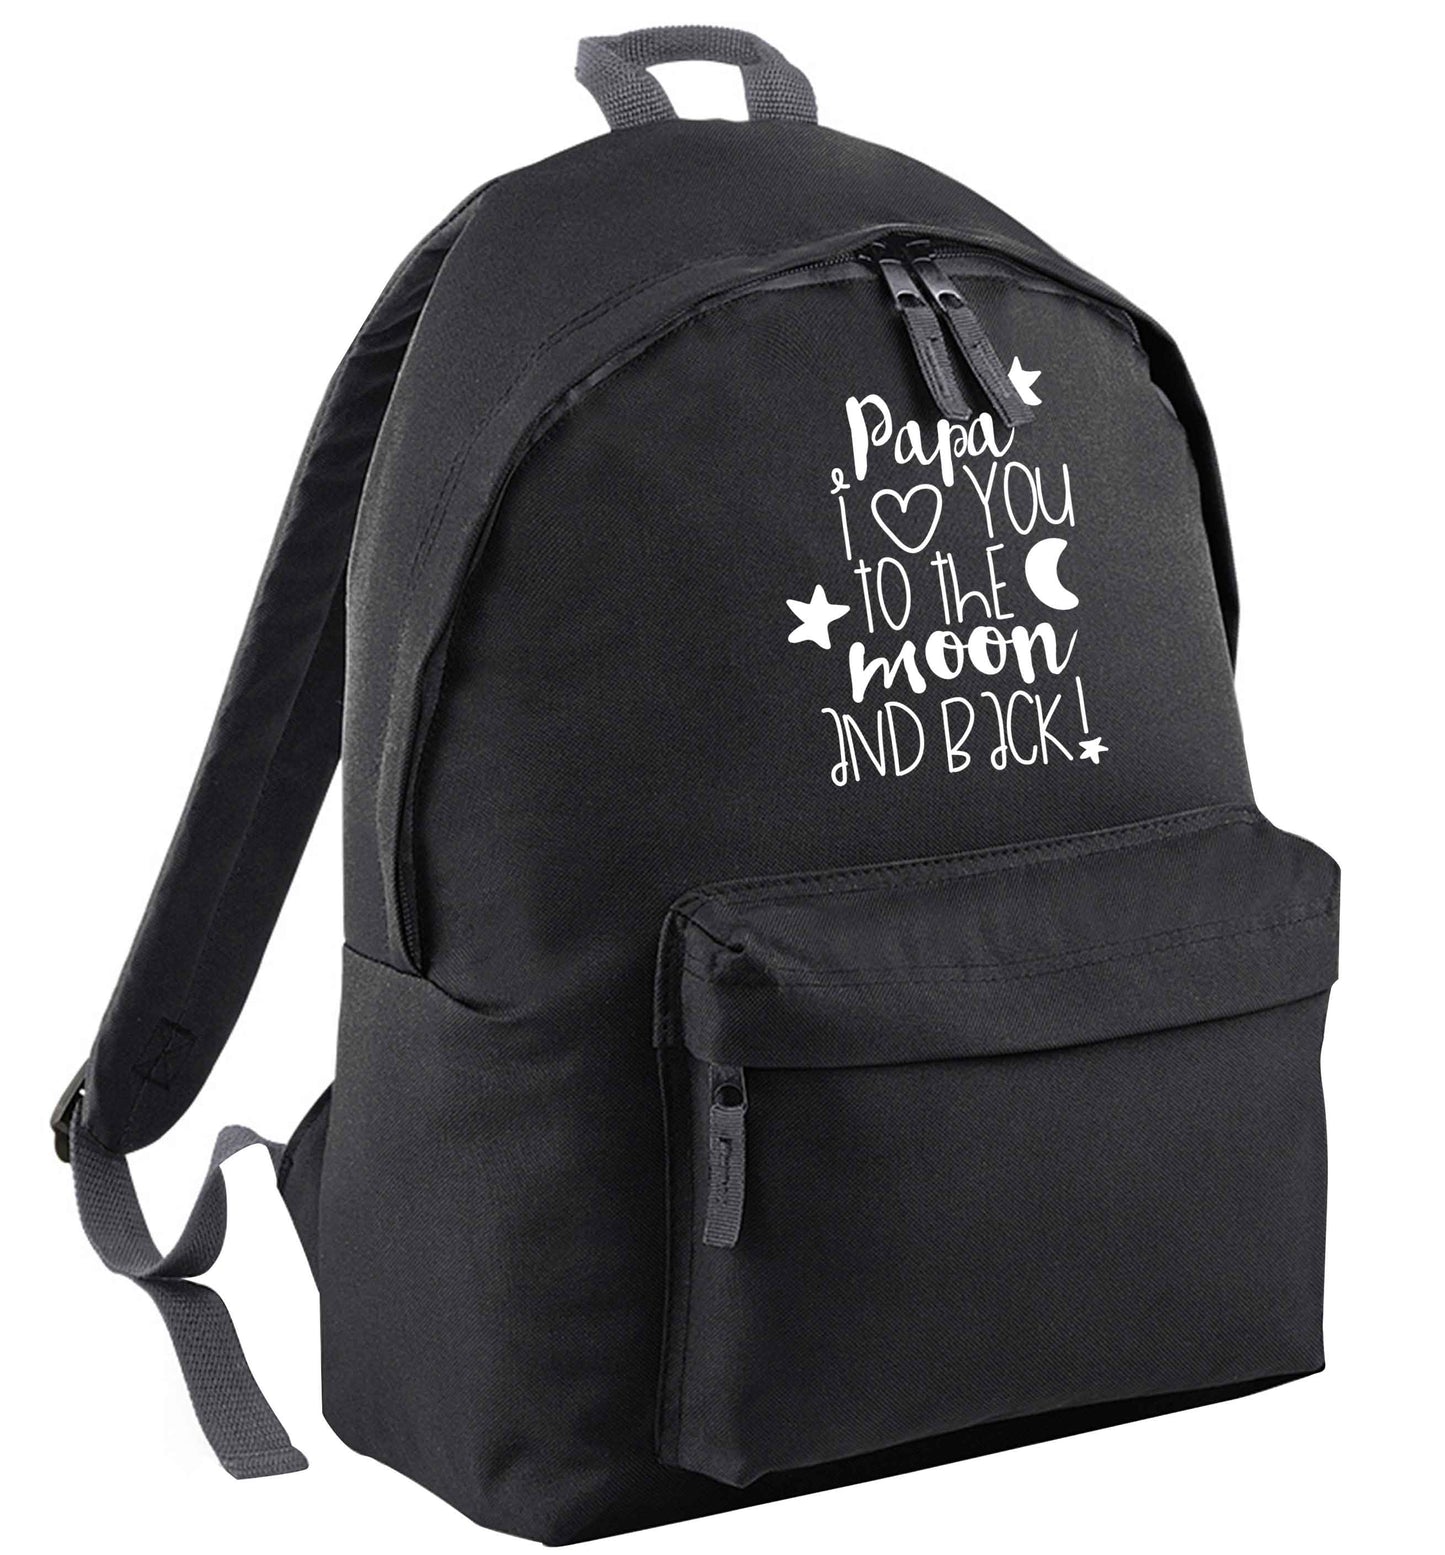 Papa I love you to the moon and back | Adults backpack